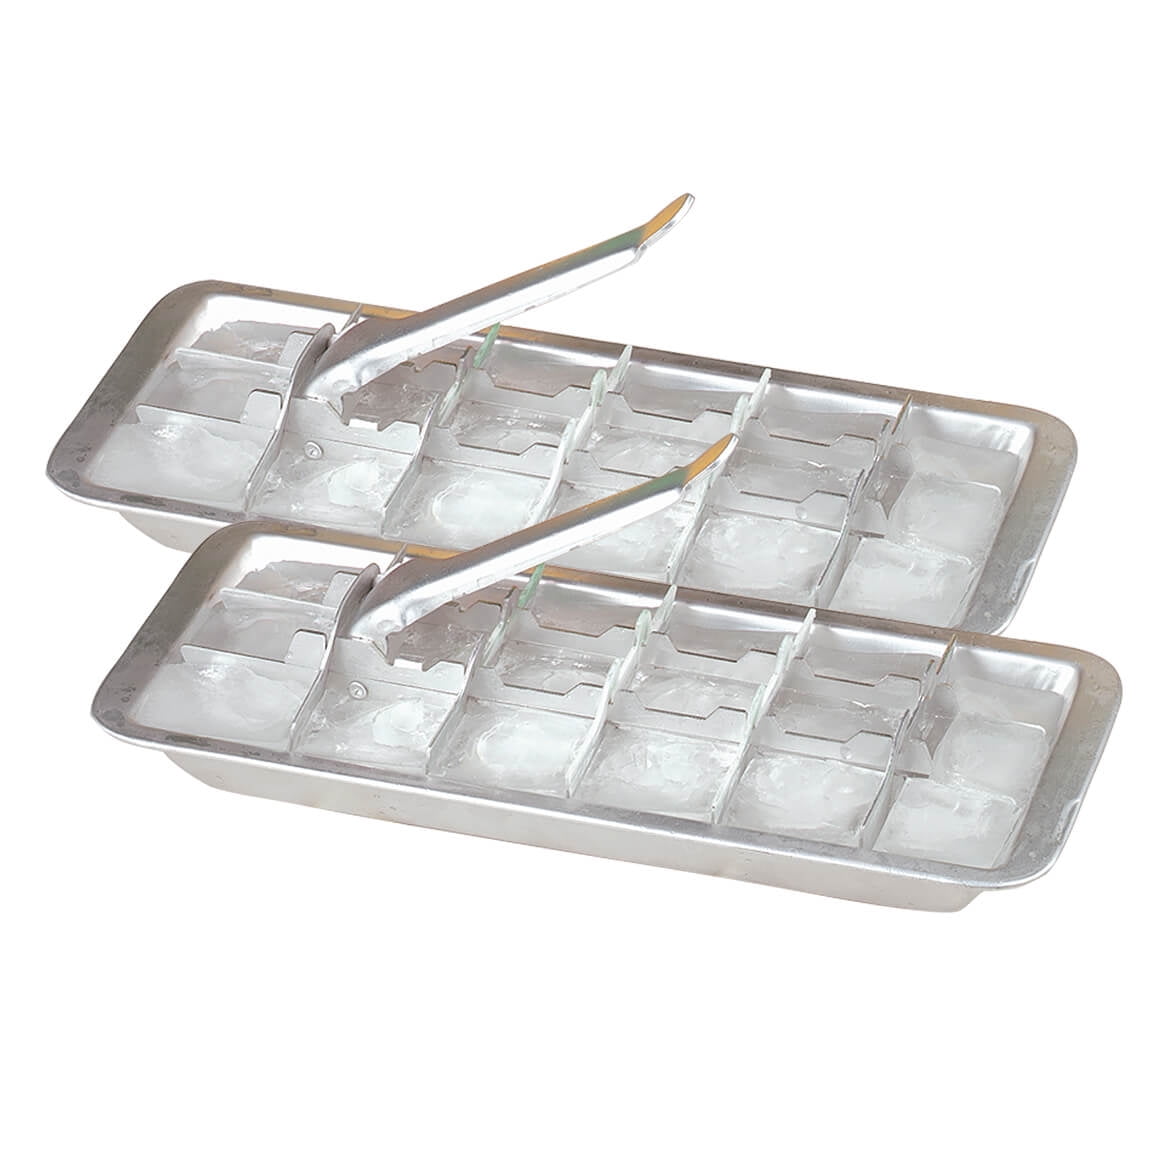 Chef Craft Flexible Thermoplastic 10-Cube Ice Cube Tray - Fun Flower Shapes